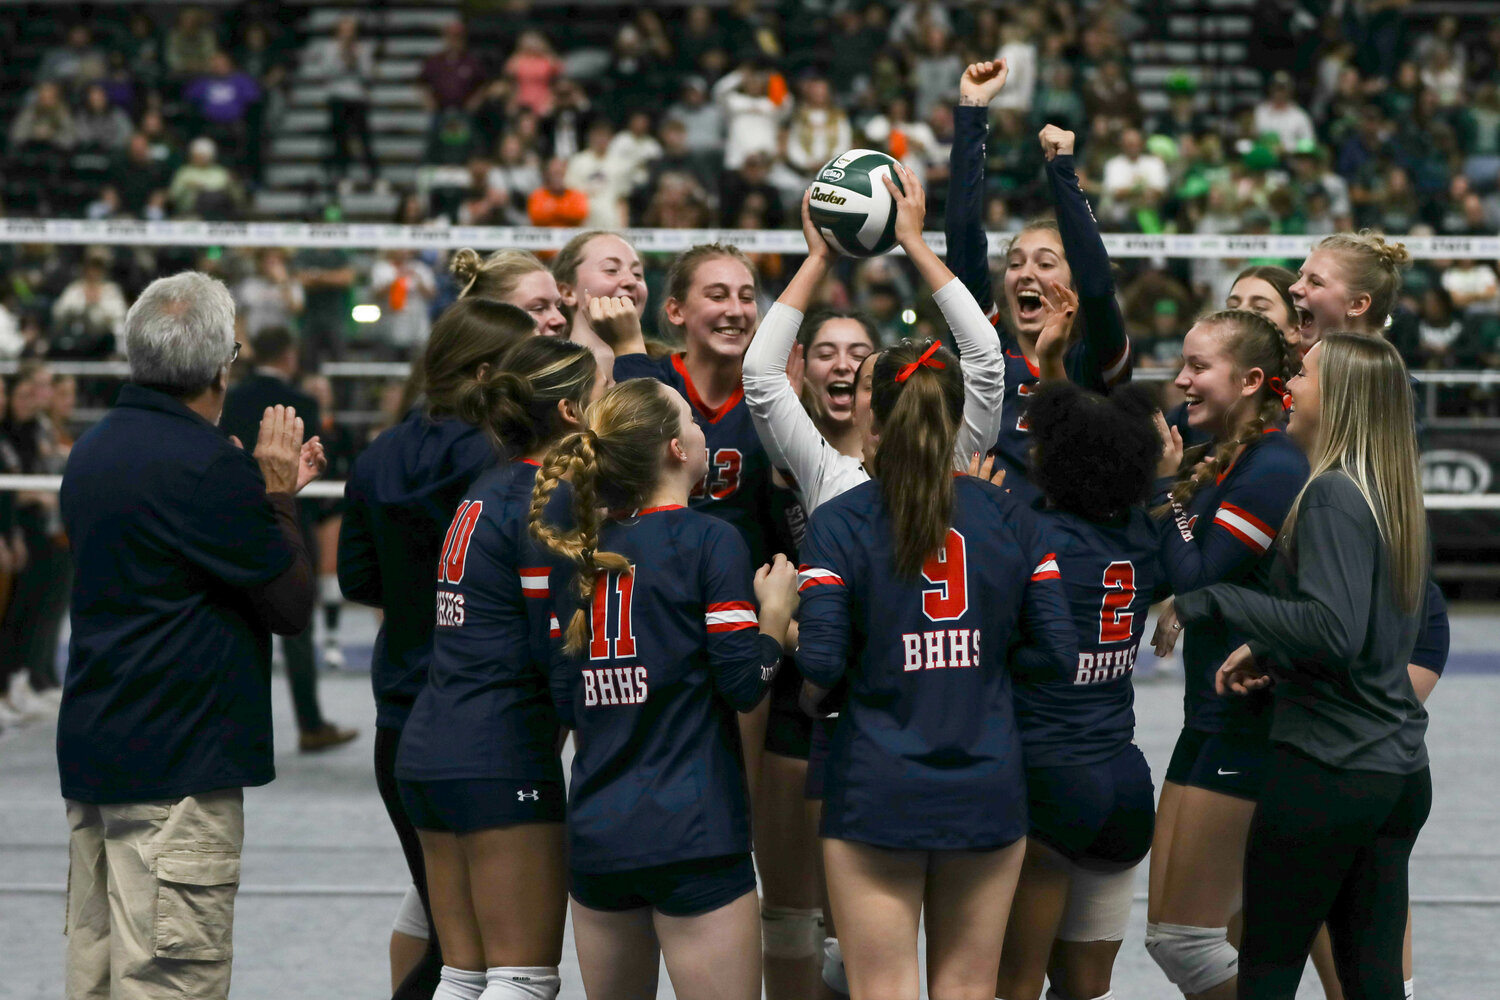 The Wolves celebrate after finishing eighth at the state tournament on Nov. 11 in Yakima.